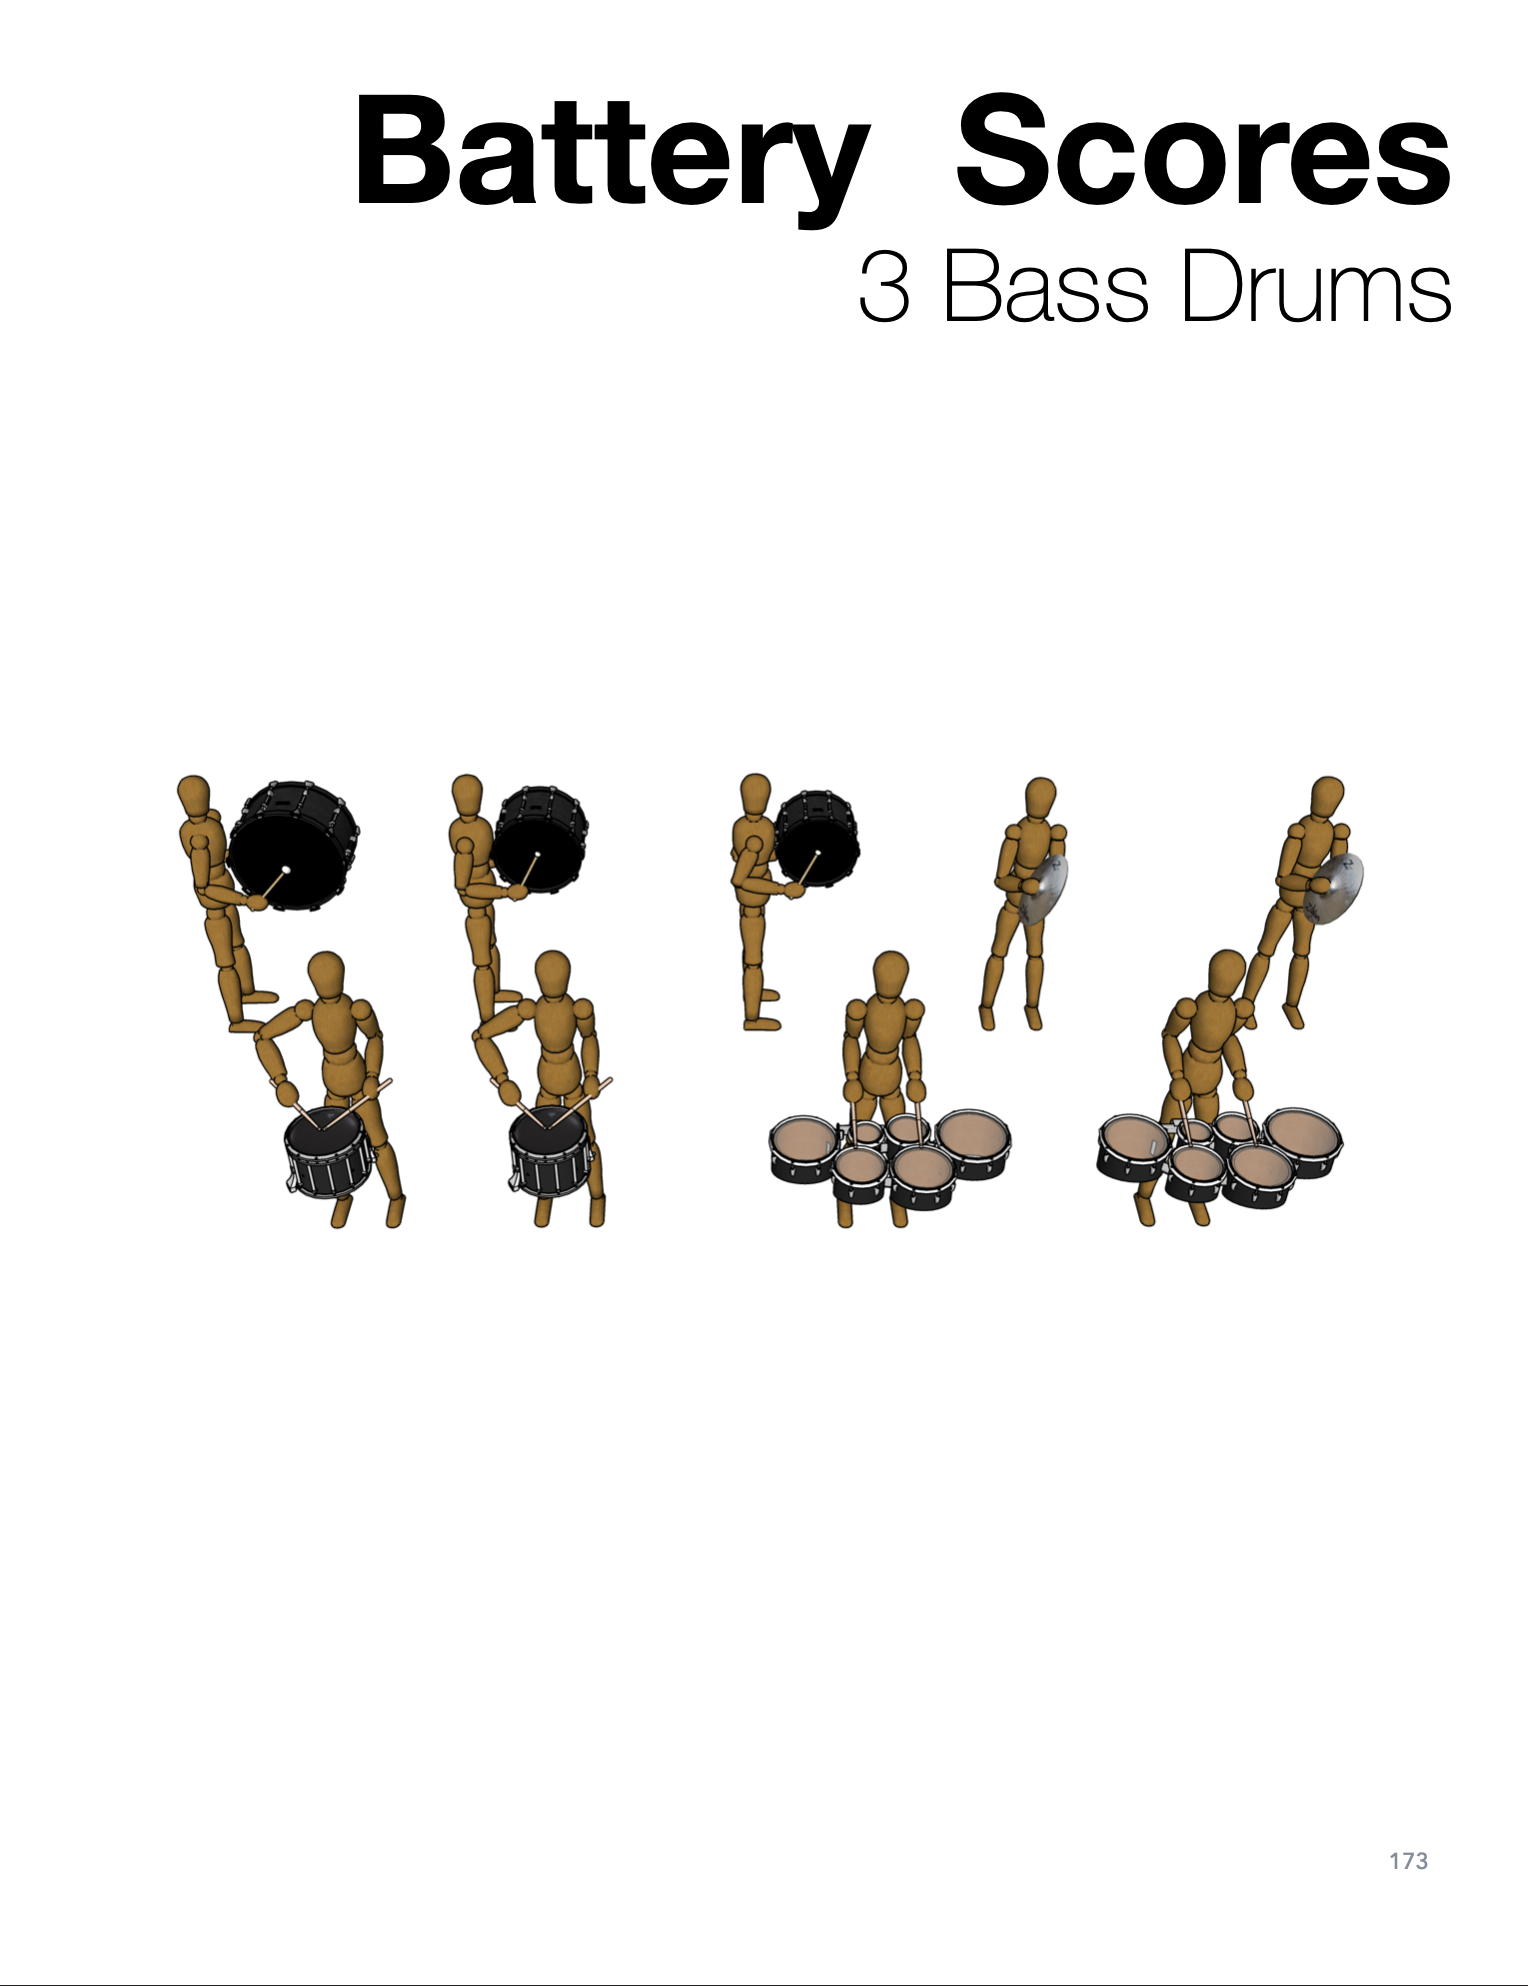 Daily Workout for Drums Book Images - 11.png